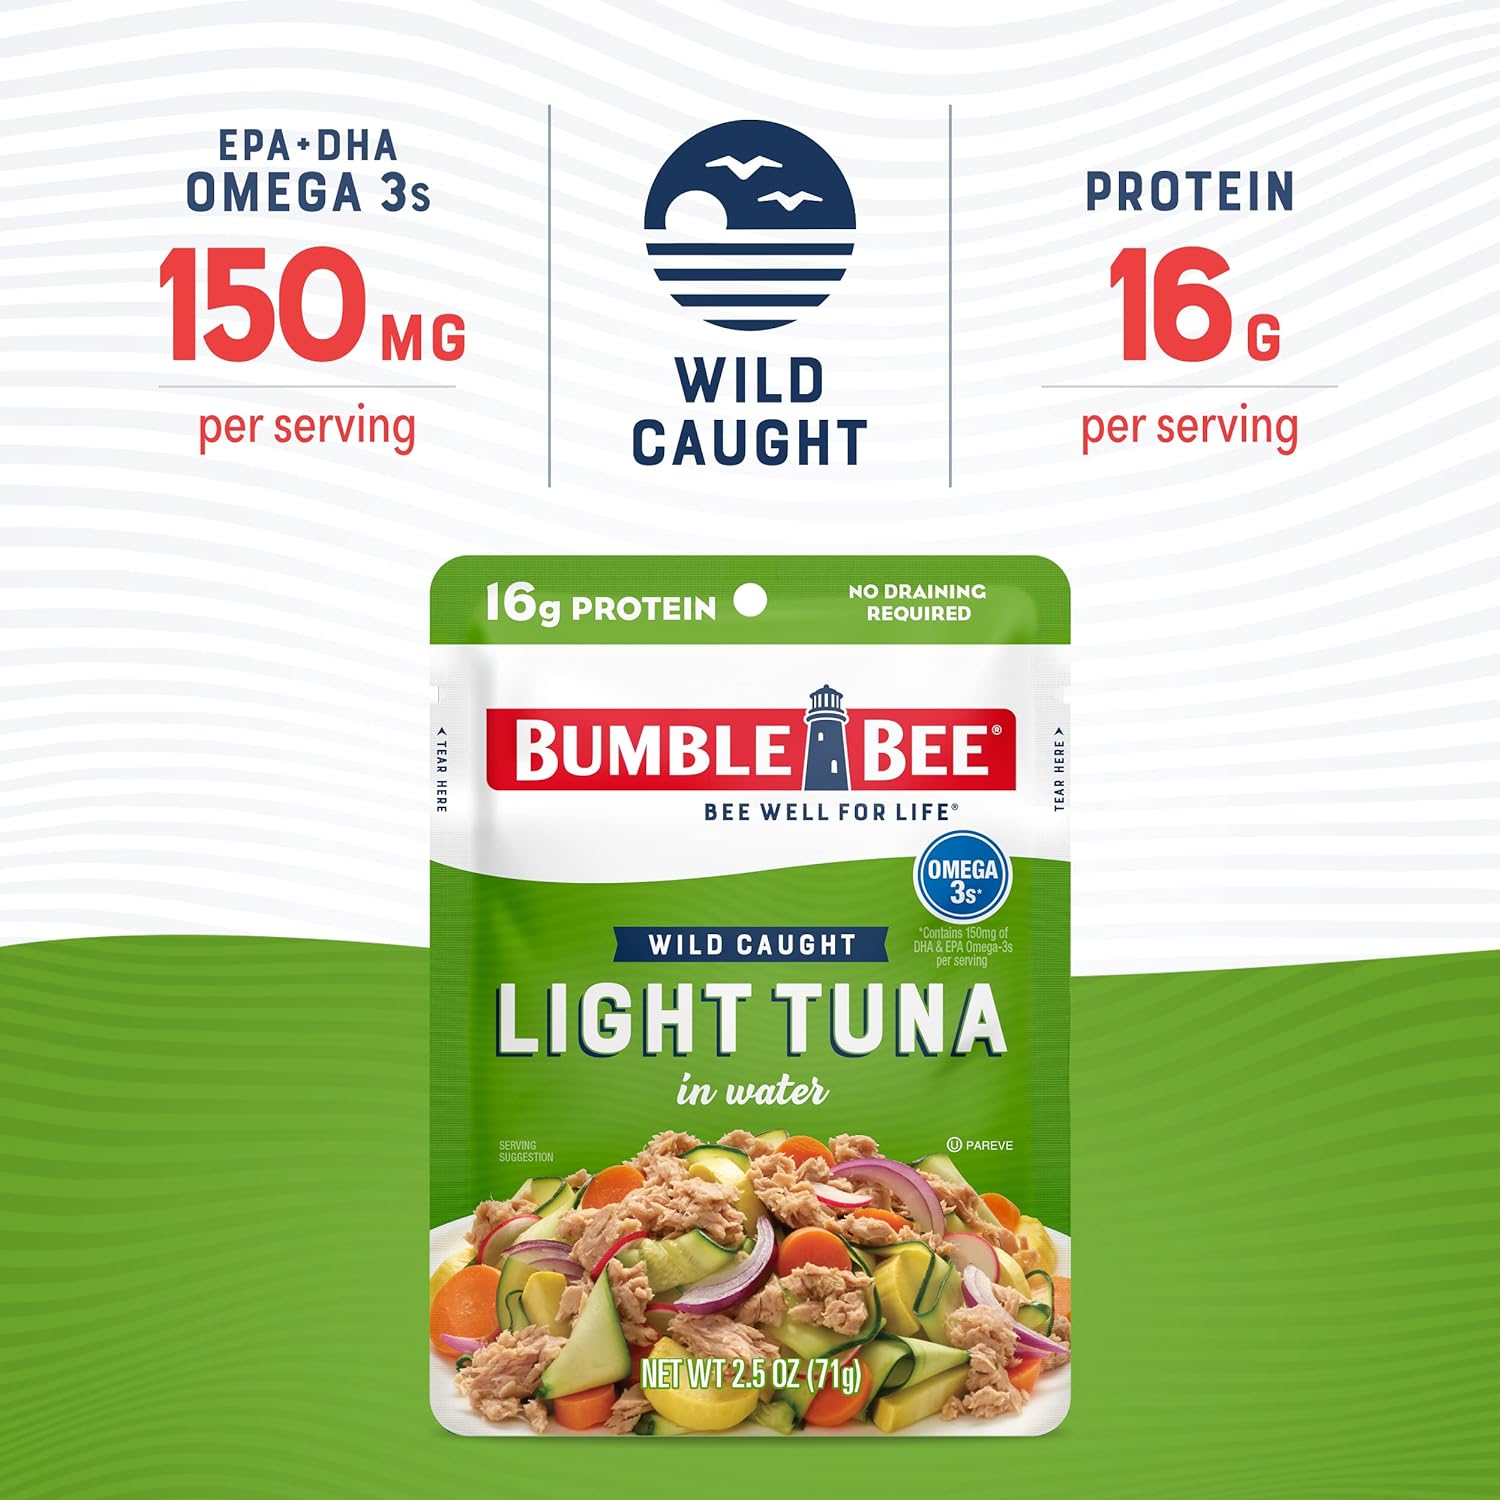 Bumble Bee Light Tuna Pouch in Water, 2.5 oz Pouch (Pack of 12) - Ready to Eat Tuna Fish, High Protein, Keto Food and Snacks, Gluten Free